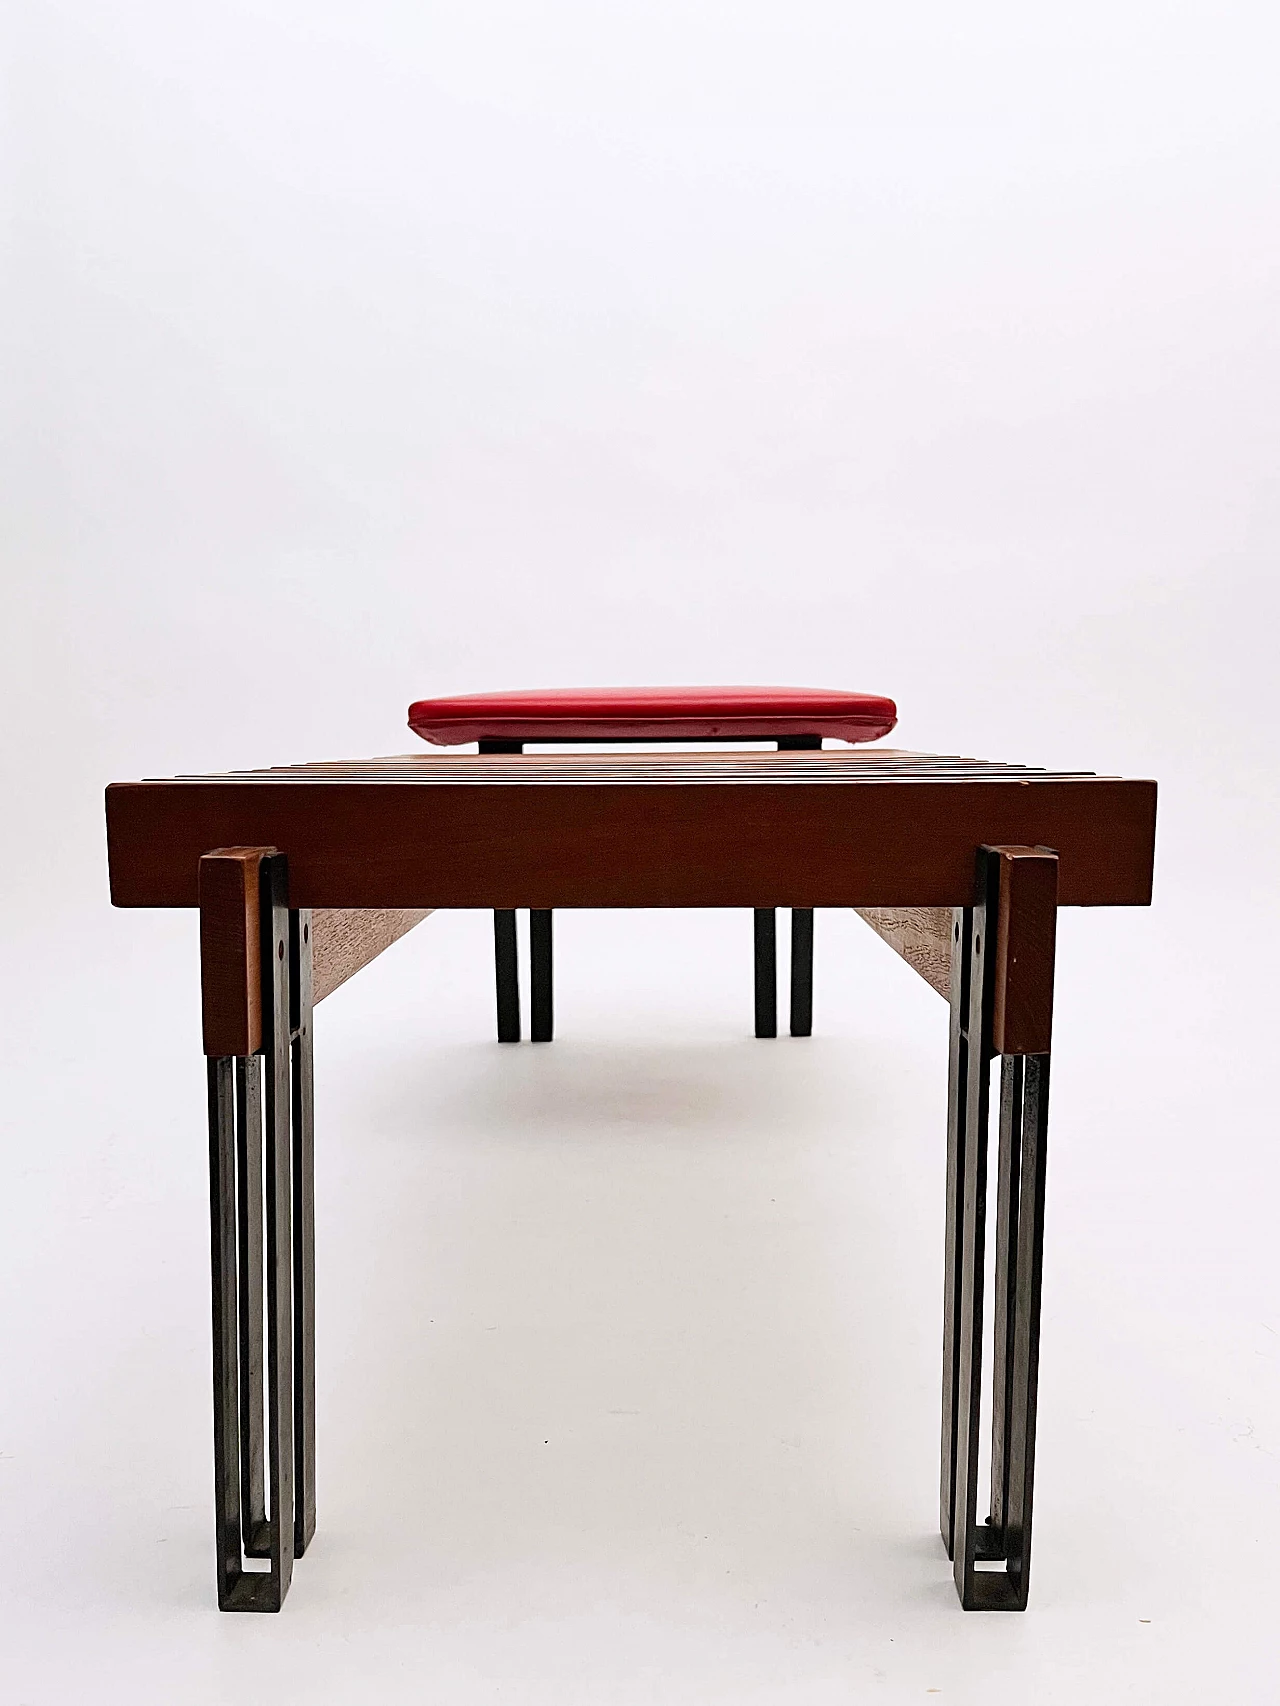 Teak and steel bench with skai seat by Inge and Luciano Rubino for APEC, 1960s 6